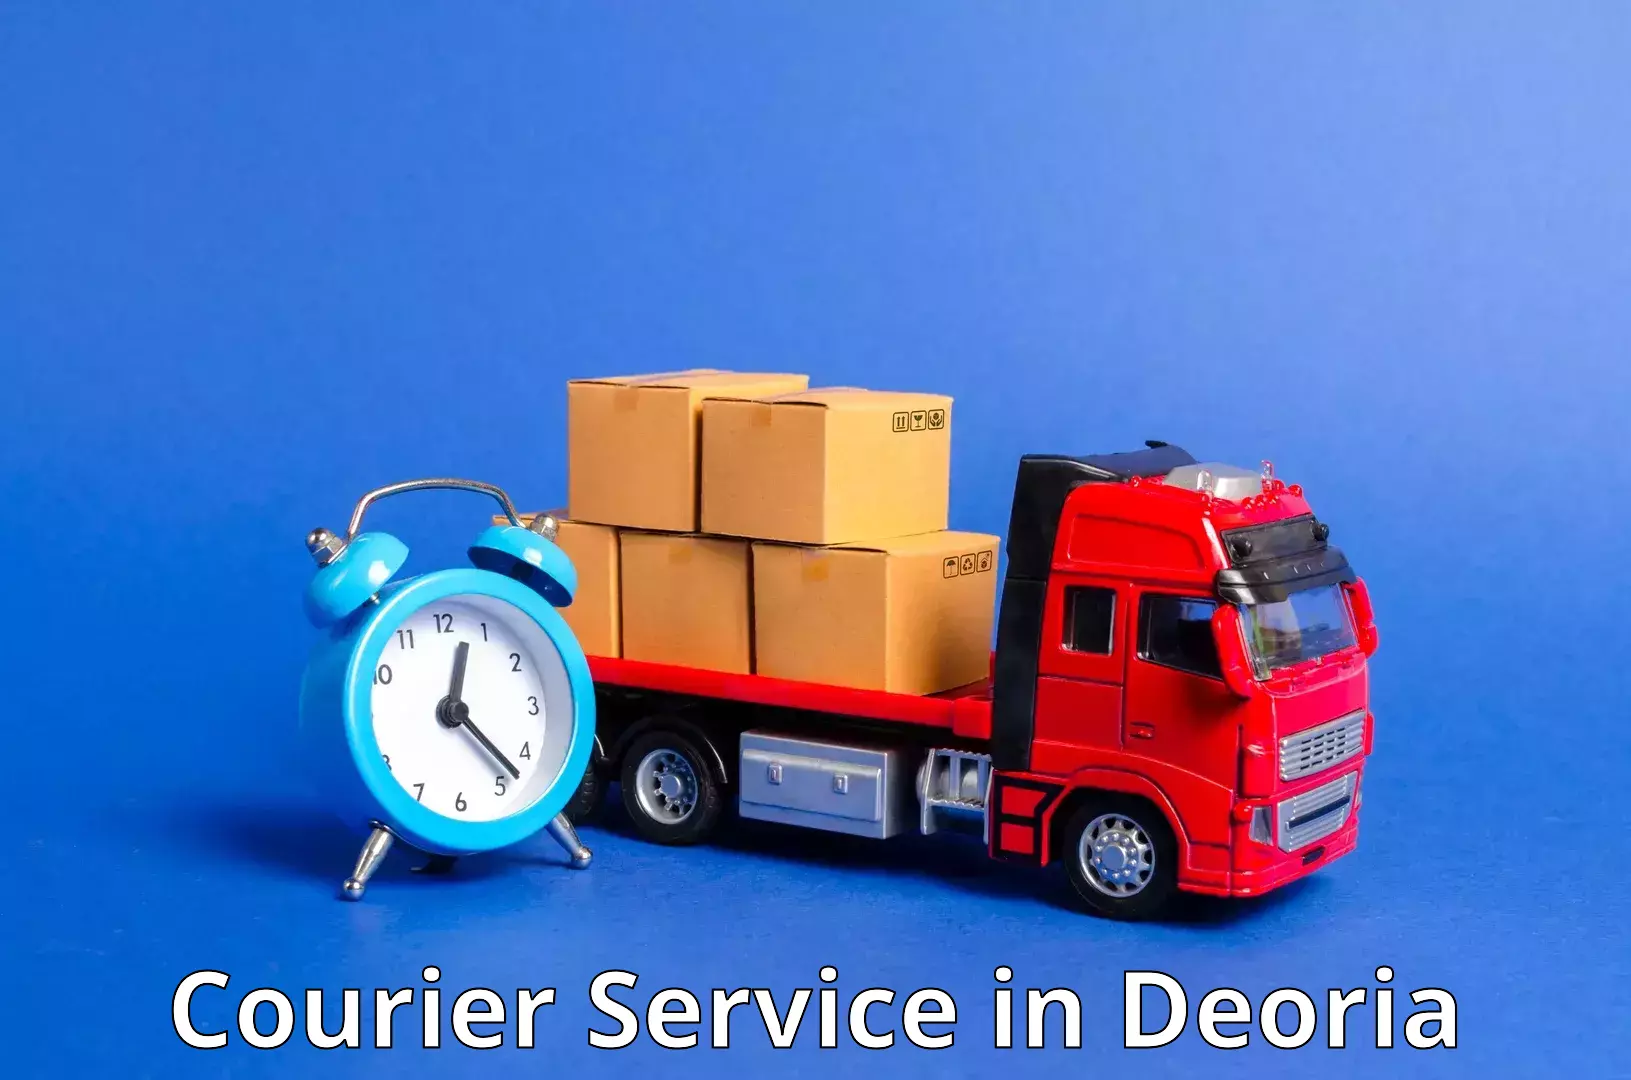 Affordable parcel service in Deoria